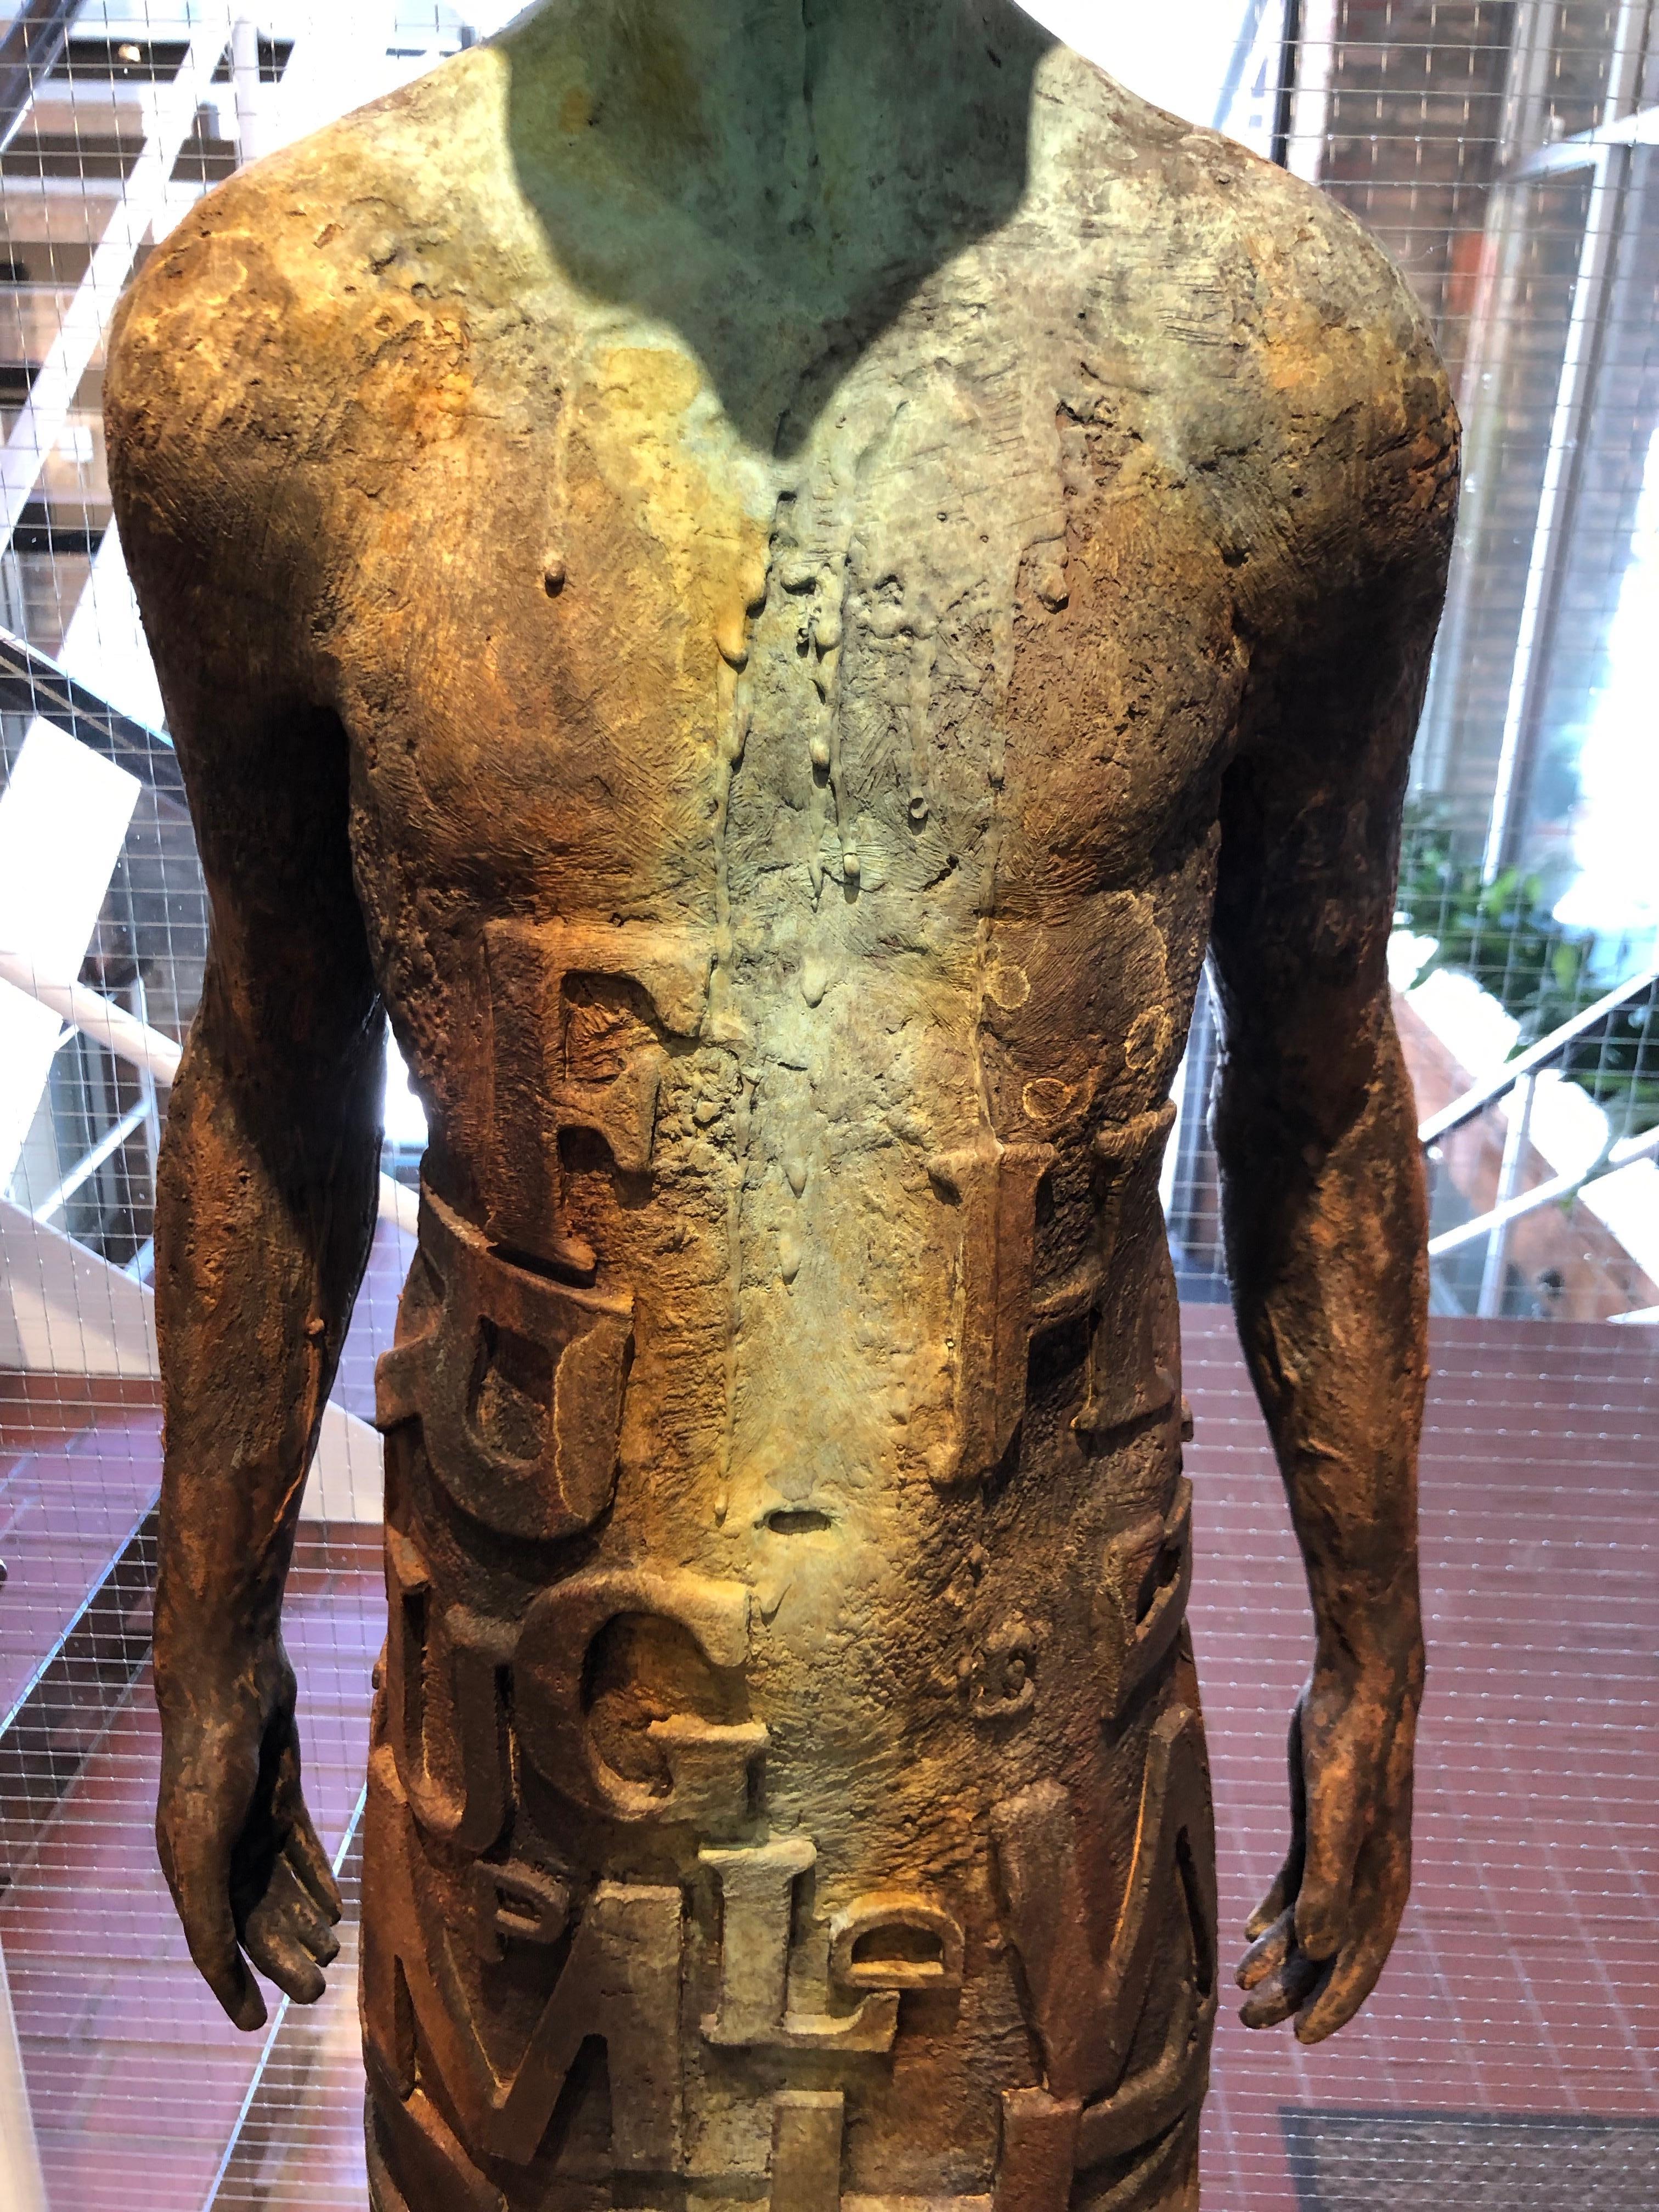 Nuntius - Bronze and Steel Sculpture with Figure and See Through 